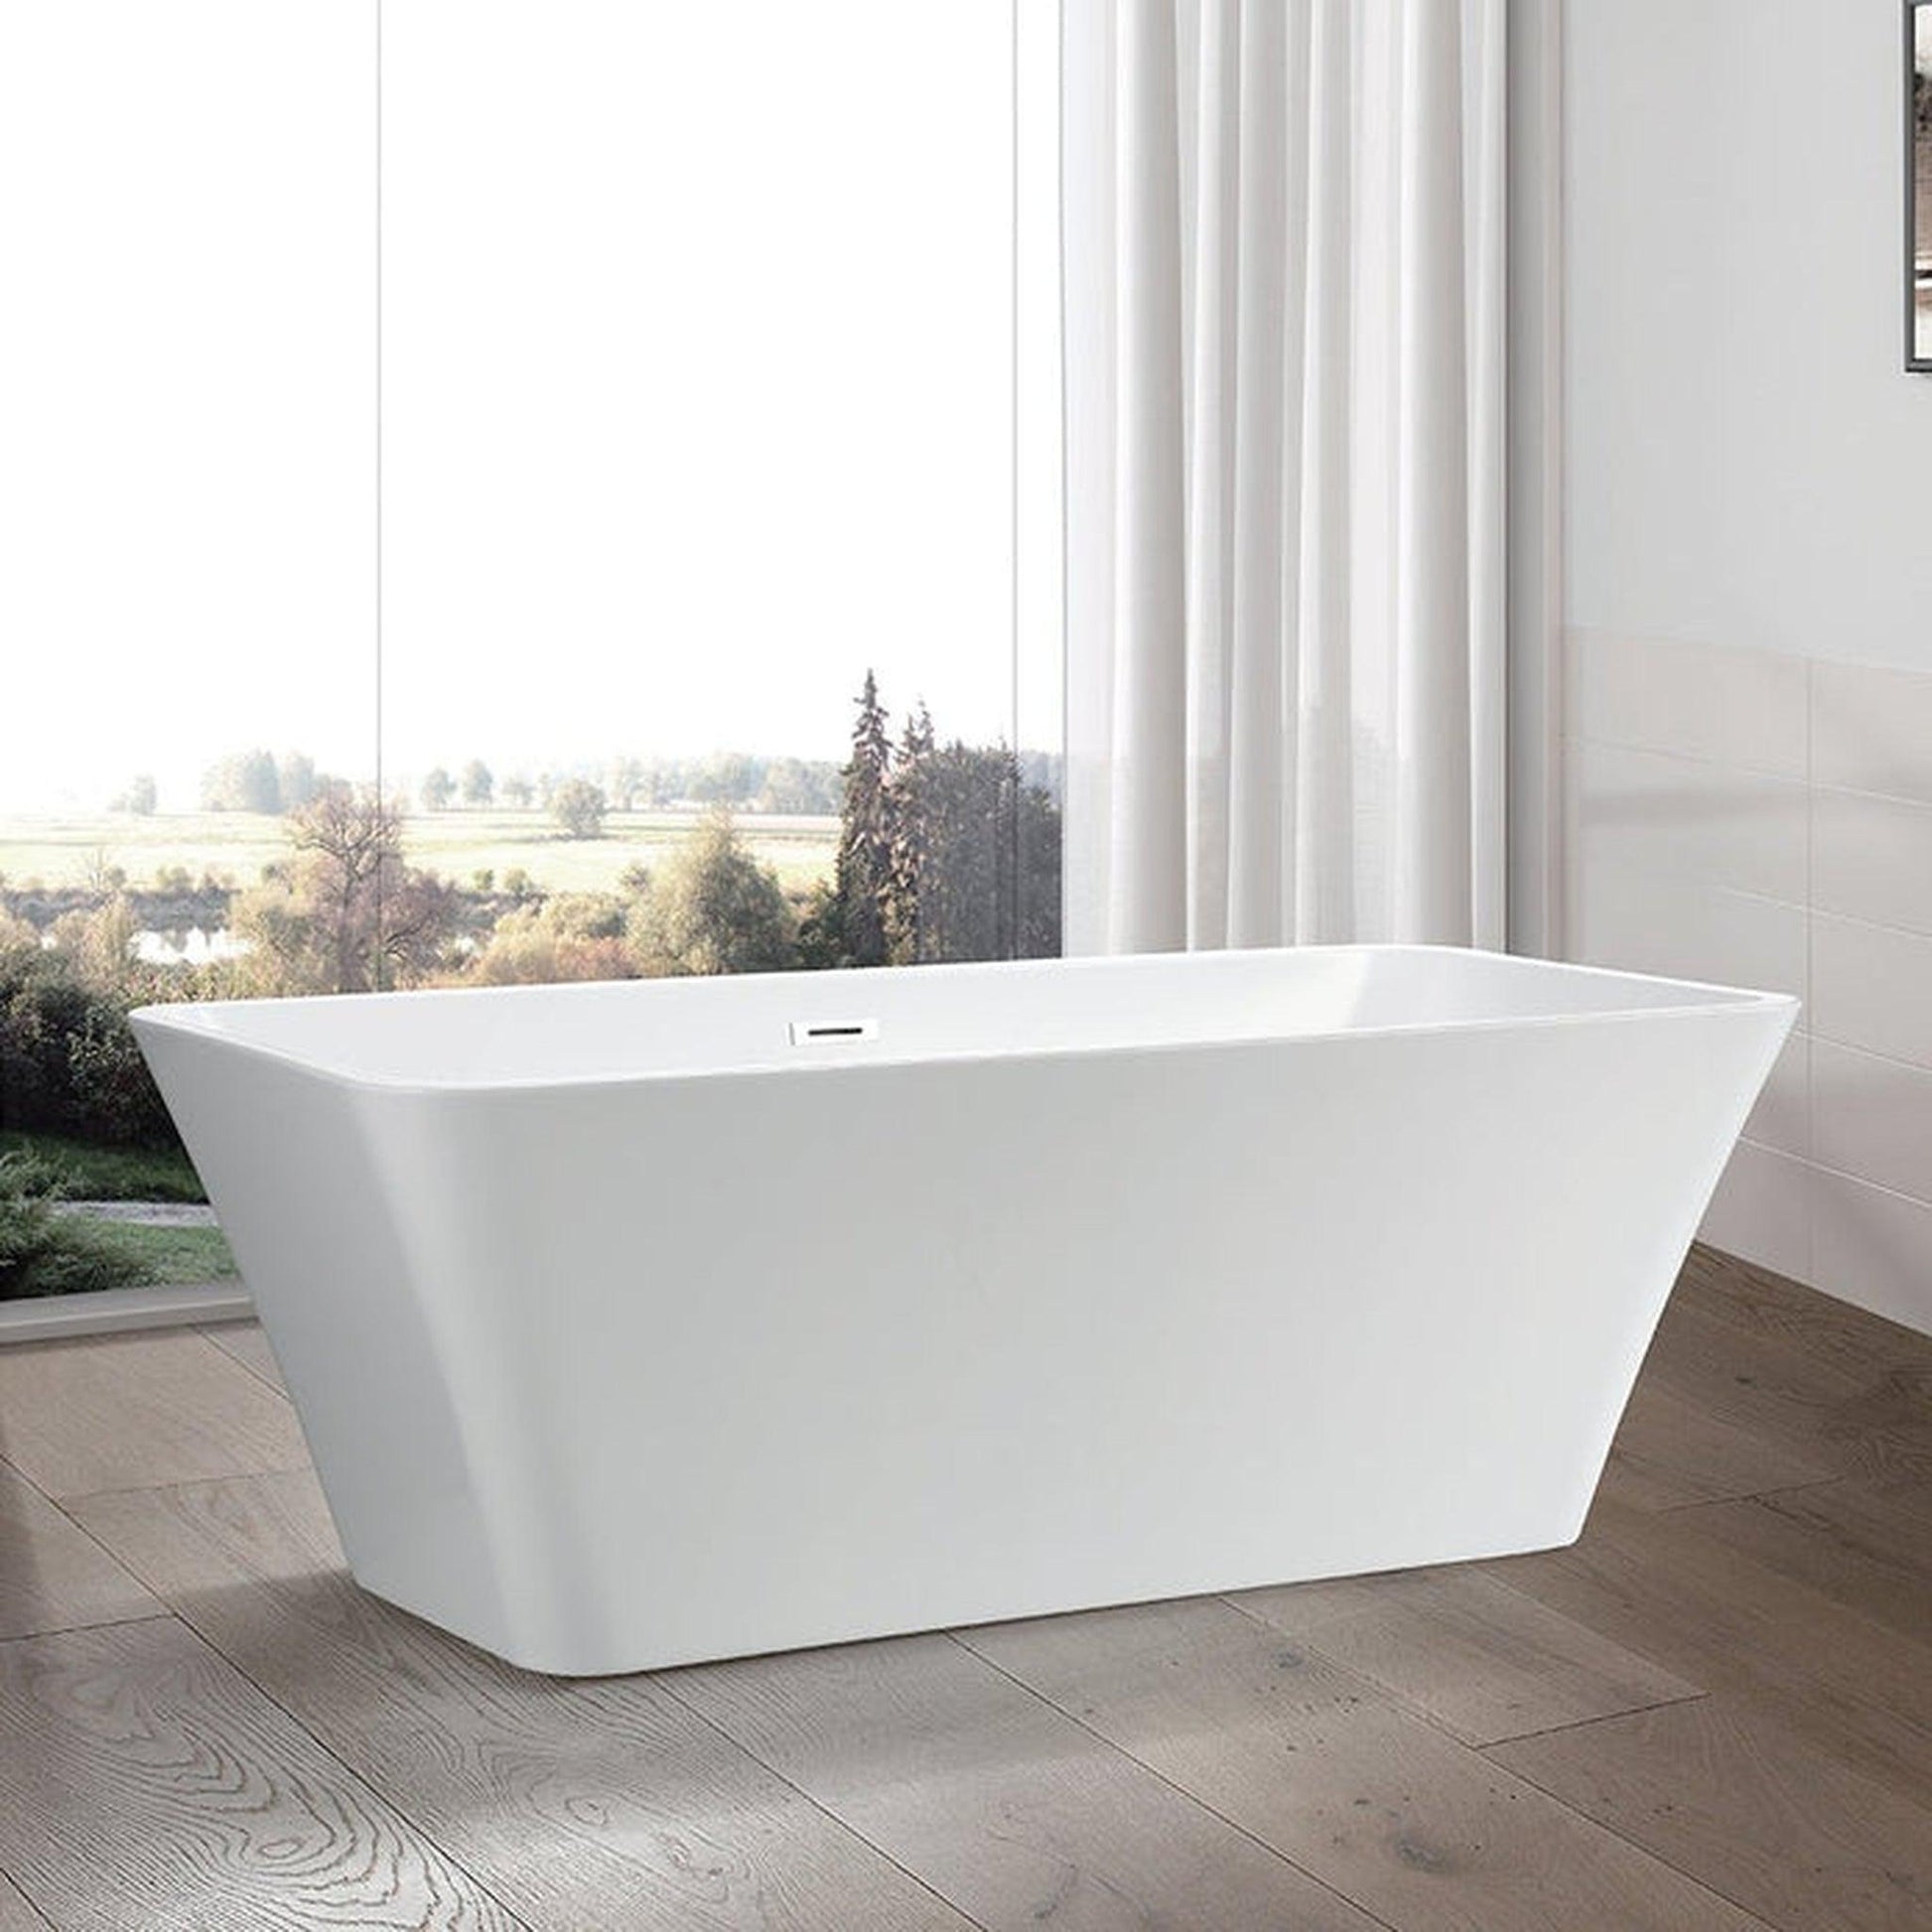 Vanity Art 67" White Acrylic Modern Stand Alone Rectangular Freestanding Soaking Bathtub With Slotted Overflow and Pop-up Drain